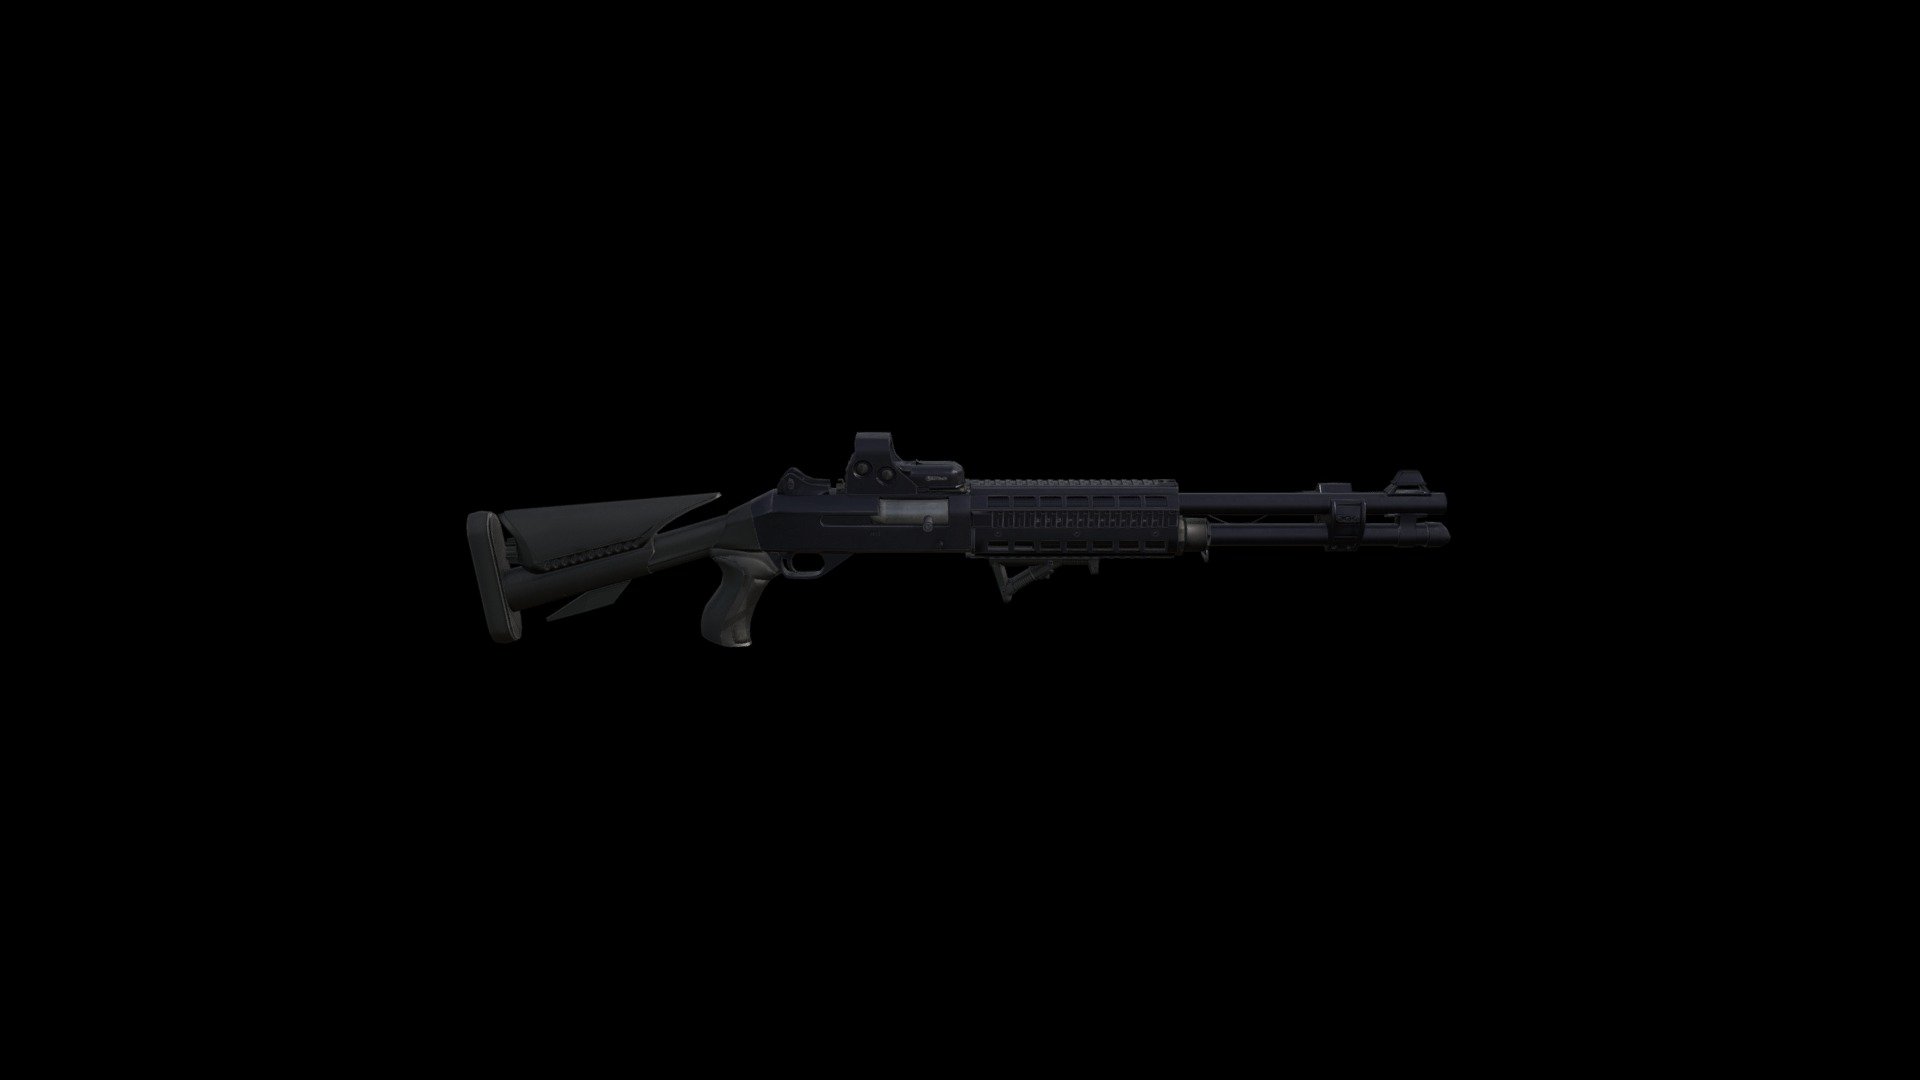 Benelli M4 Shotgun, cant call it complete yet, but i dont plan to improve on this model any time soon considering that i have already put awesome amount of energy into it. Hope you like it 3d model